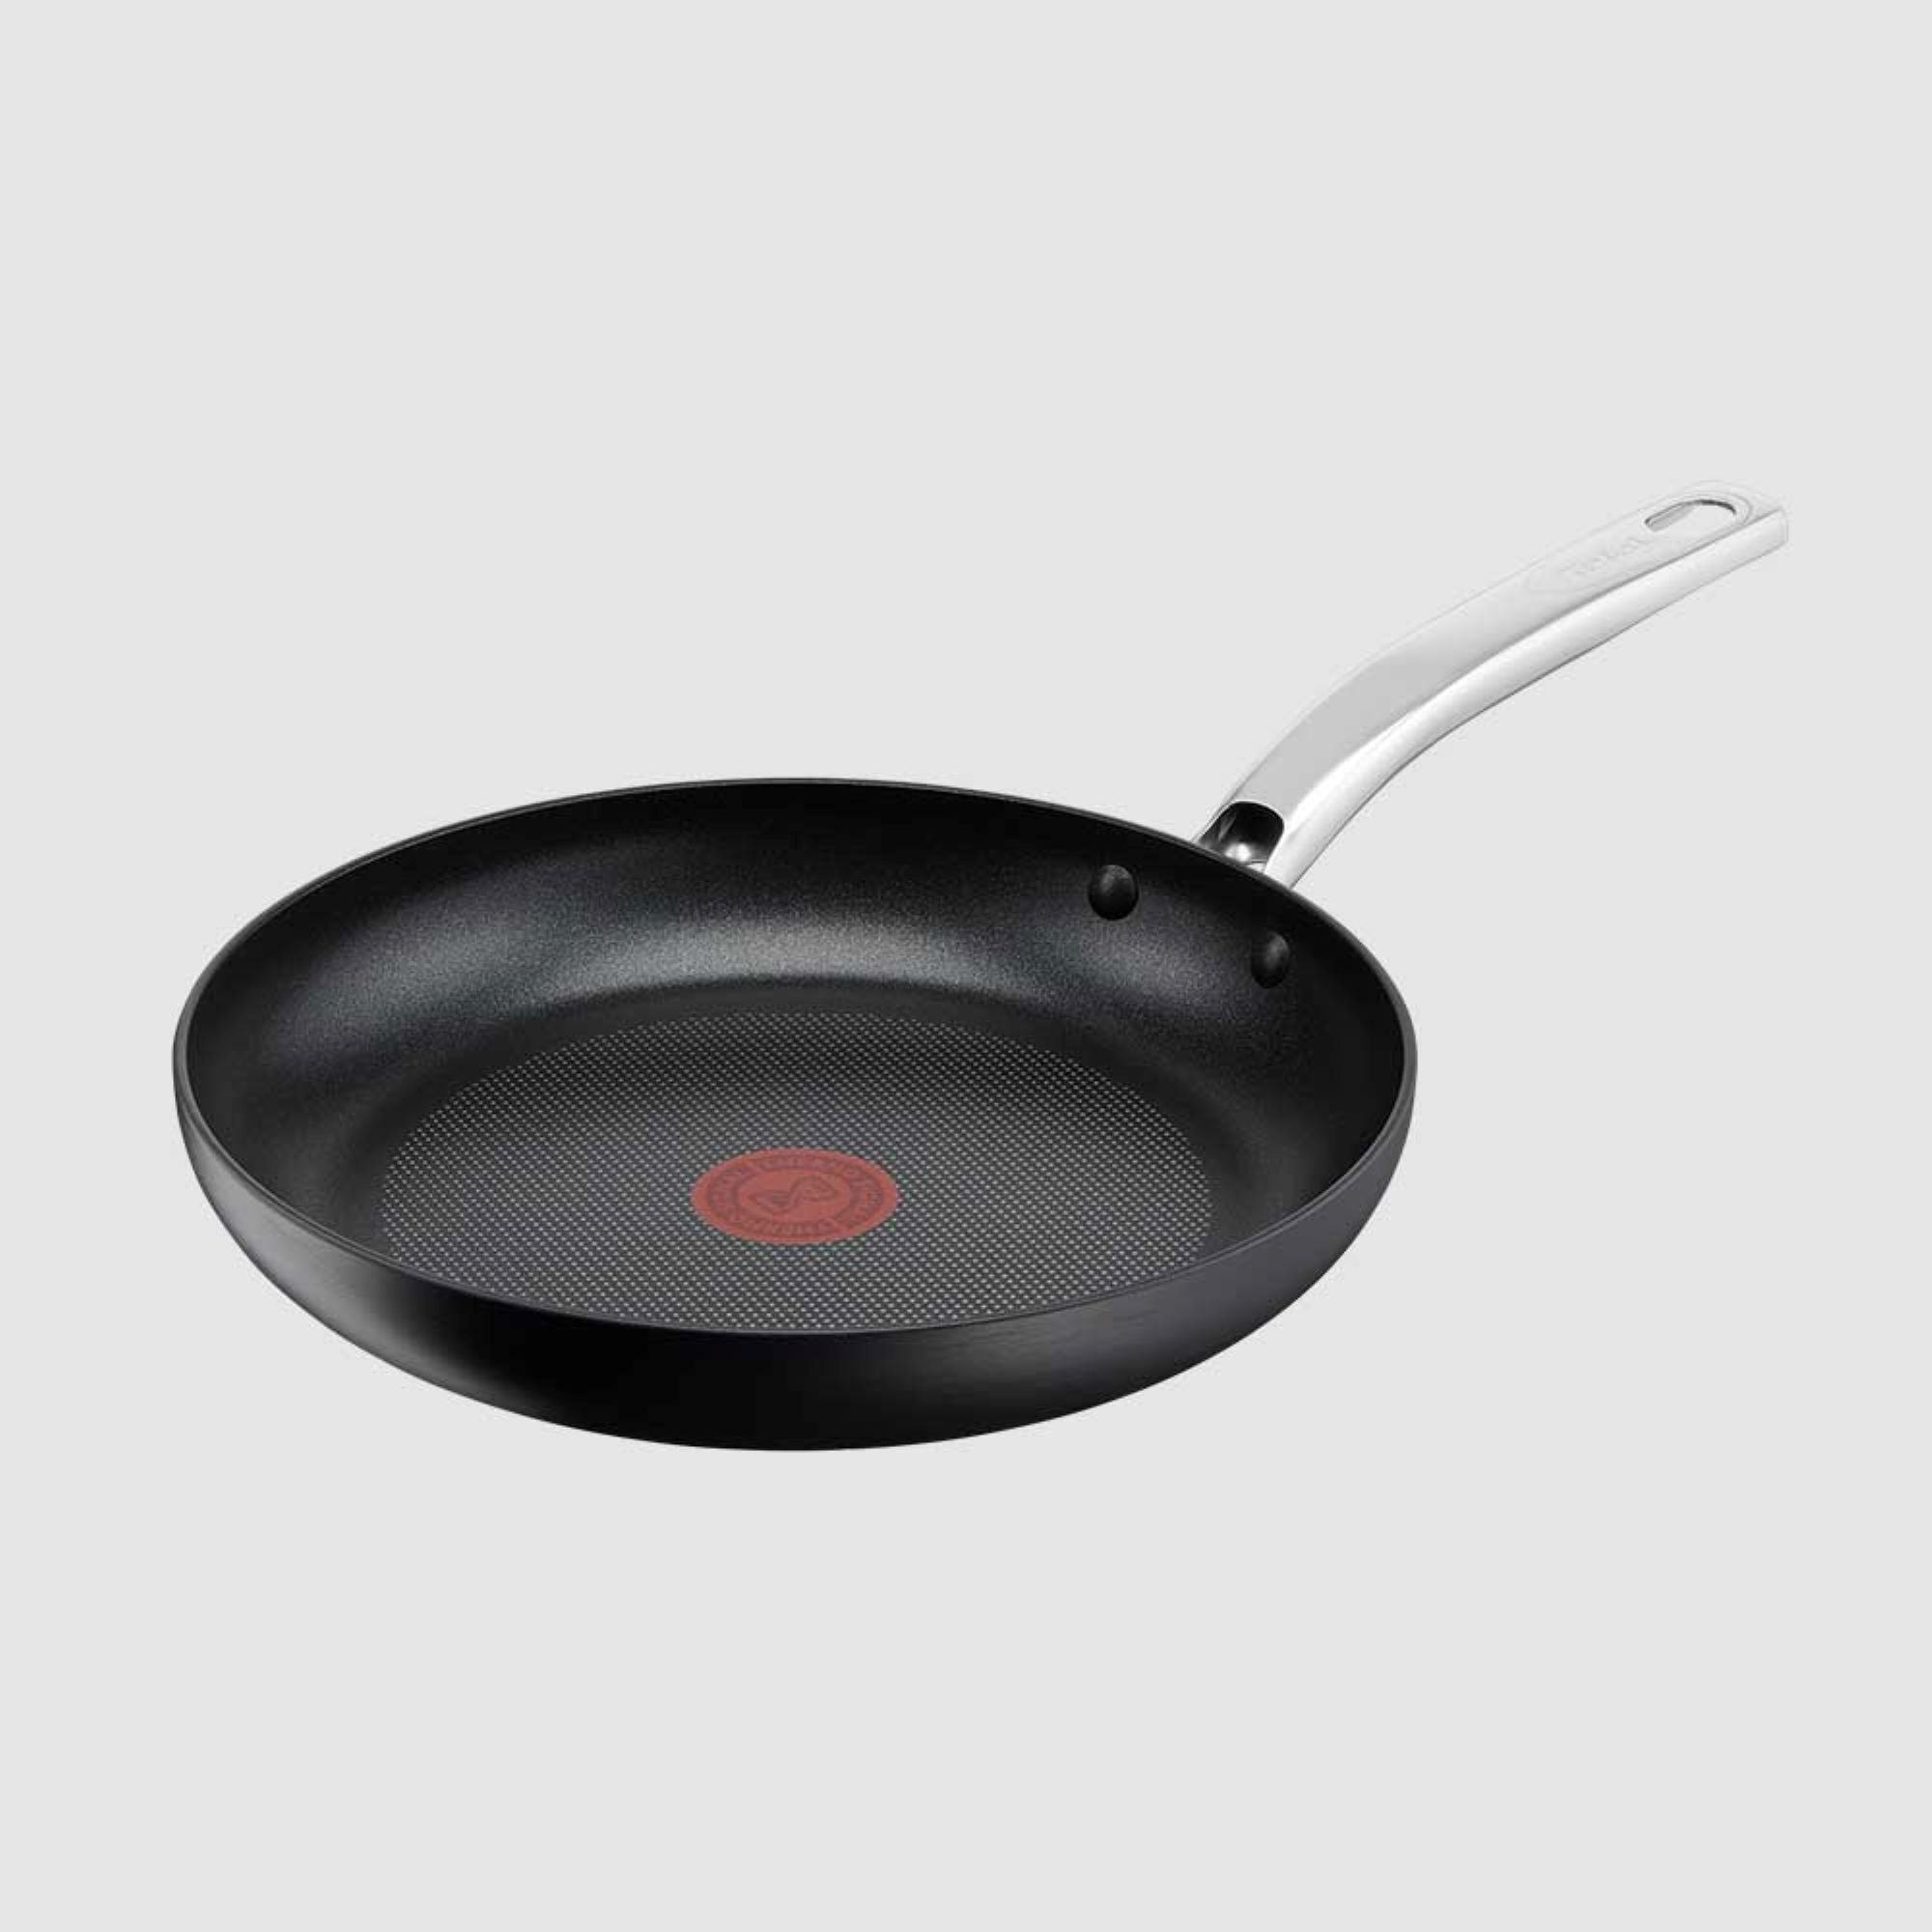 Tefal Gourmet Anodised Non-Stick Frypan 26cm